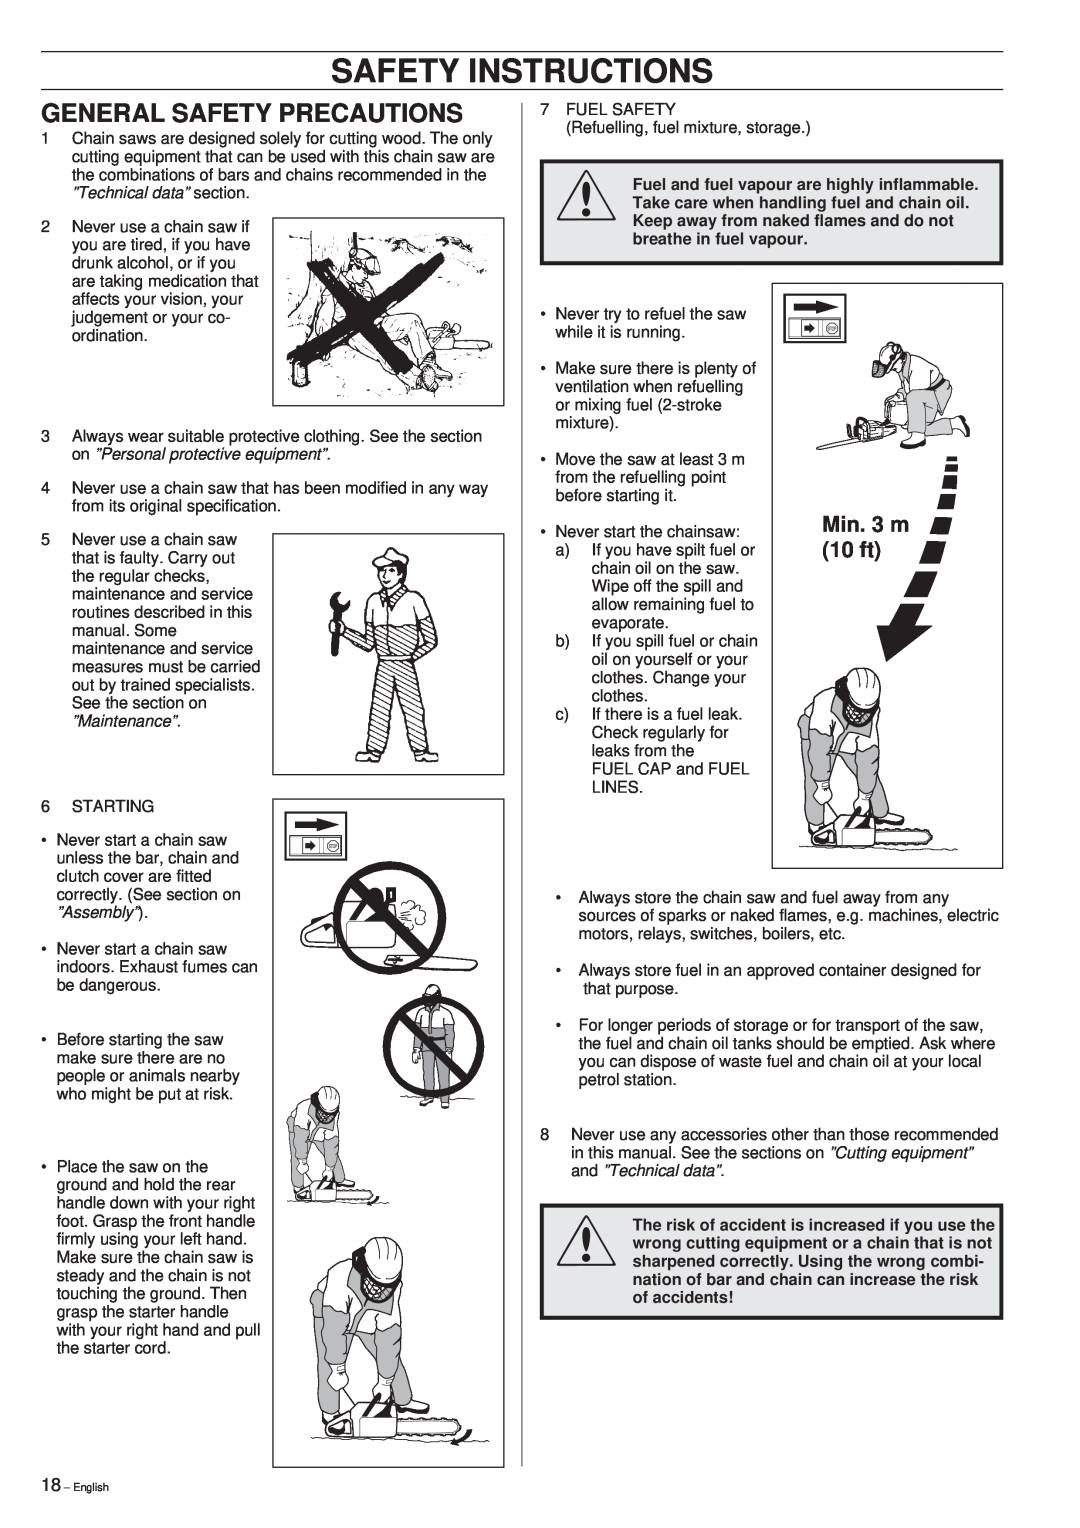 Husqvarna 394XP manual Safety Instructions, Min. 3 m, 10 ft, ”Technical data” section, on ”Personal protective equipment” 